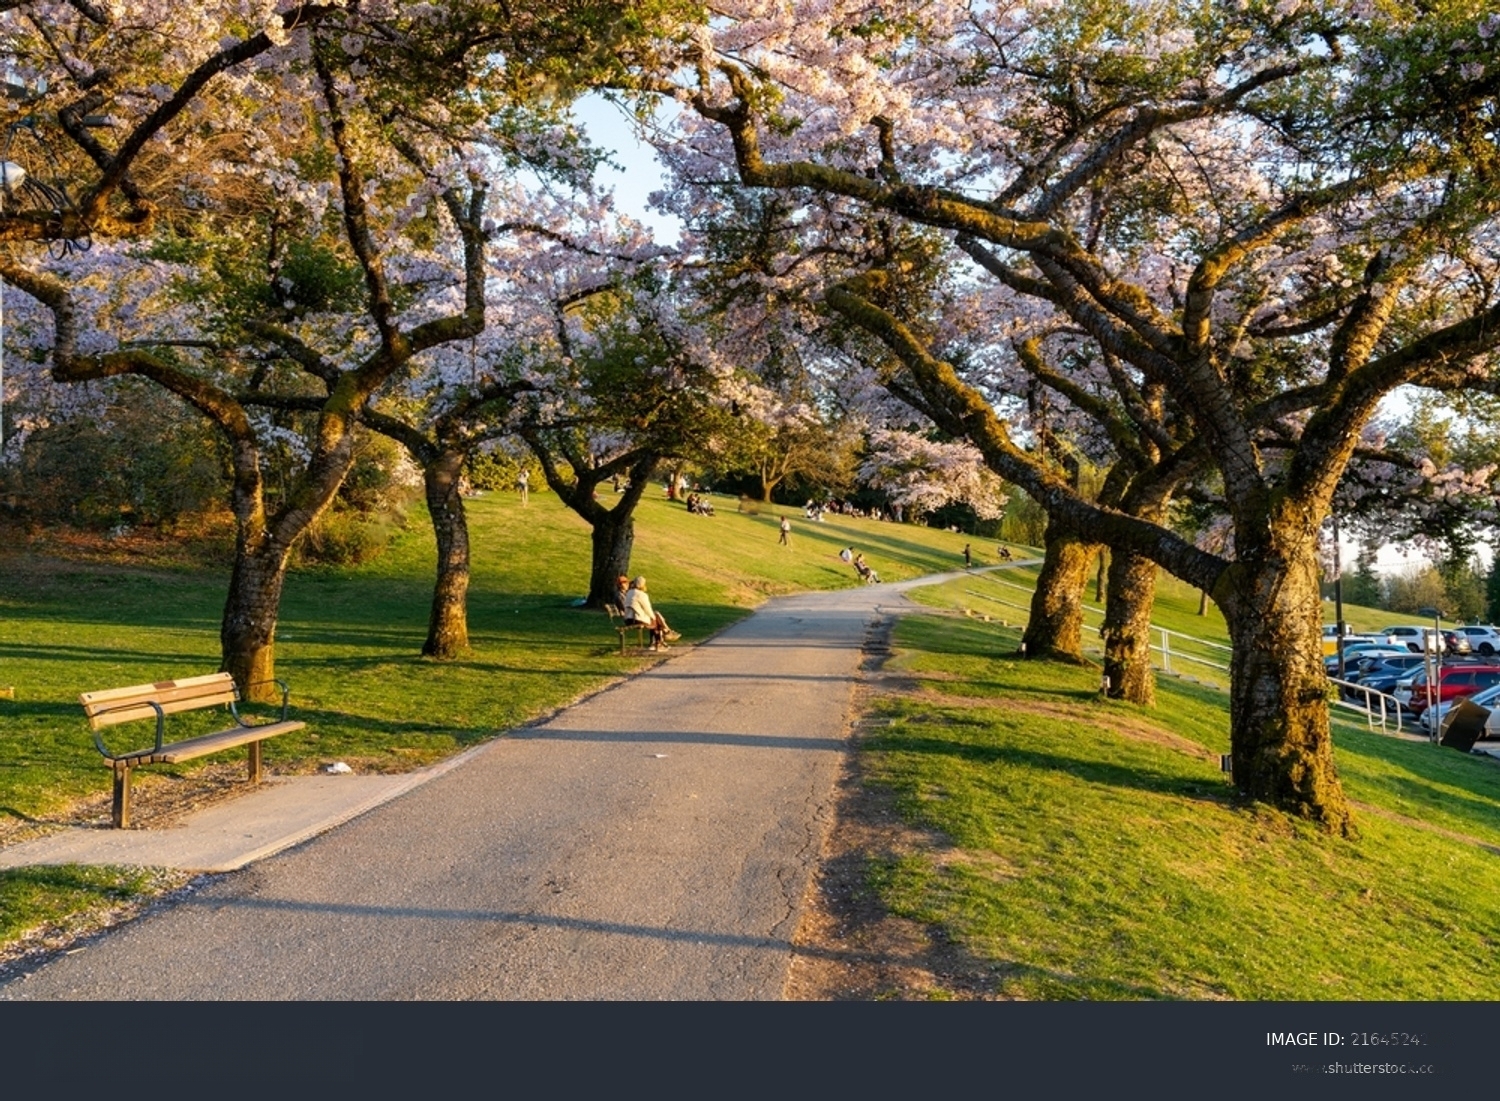 Enjoy Cherry Blossoms on Burnaby Mountain